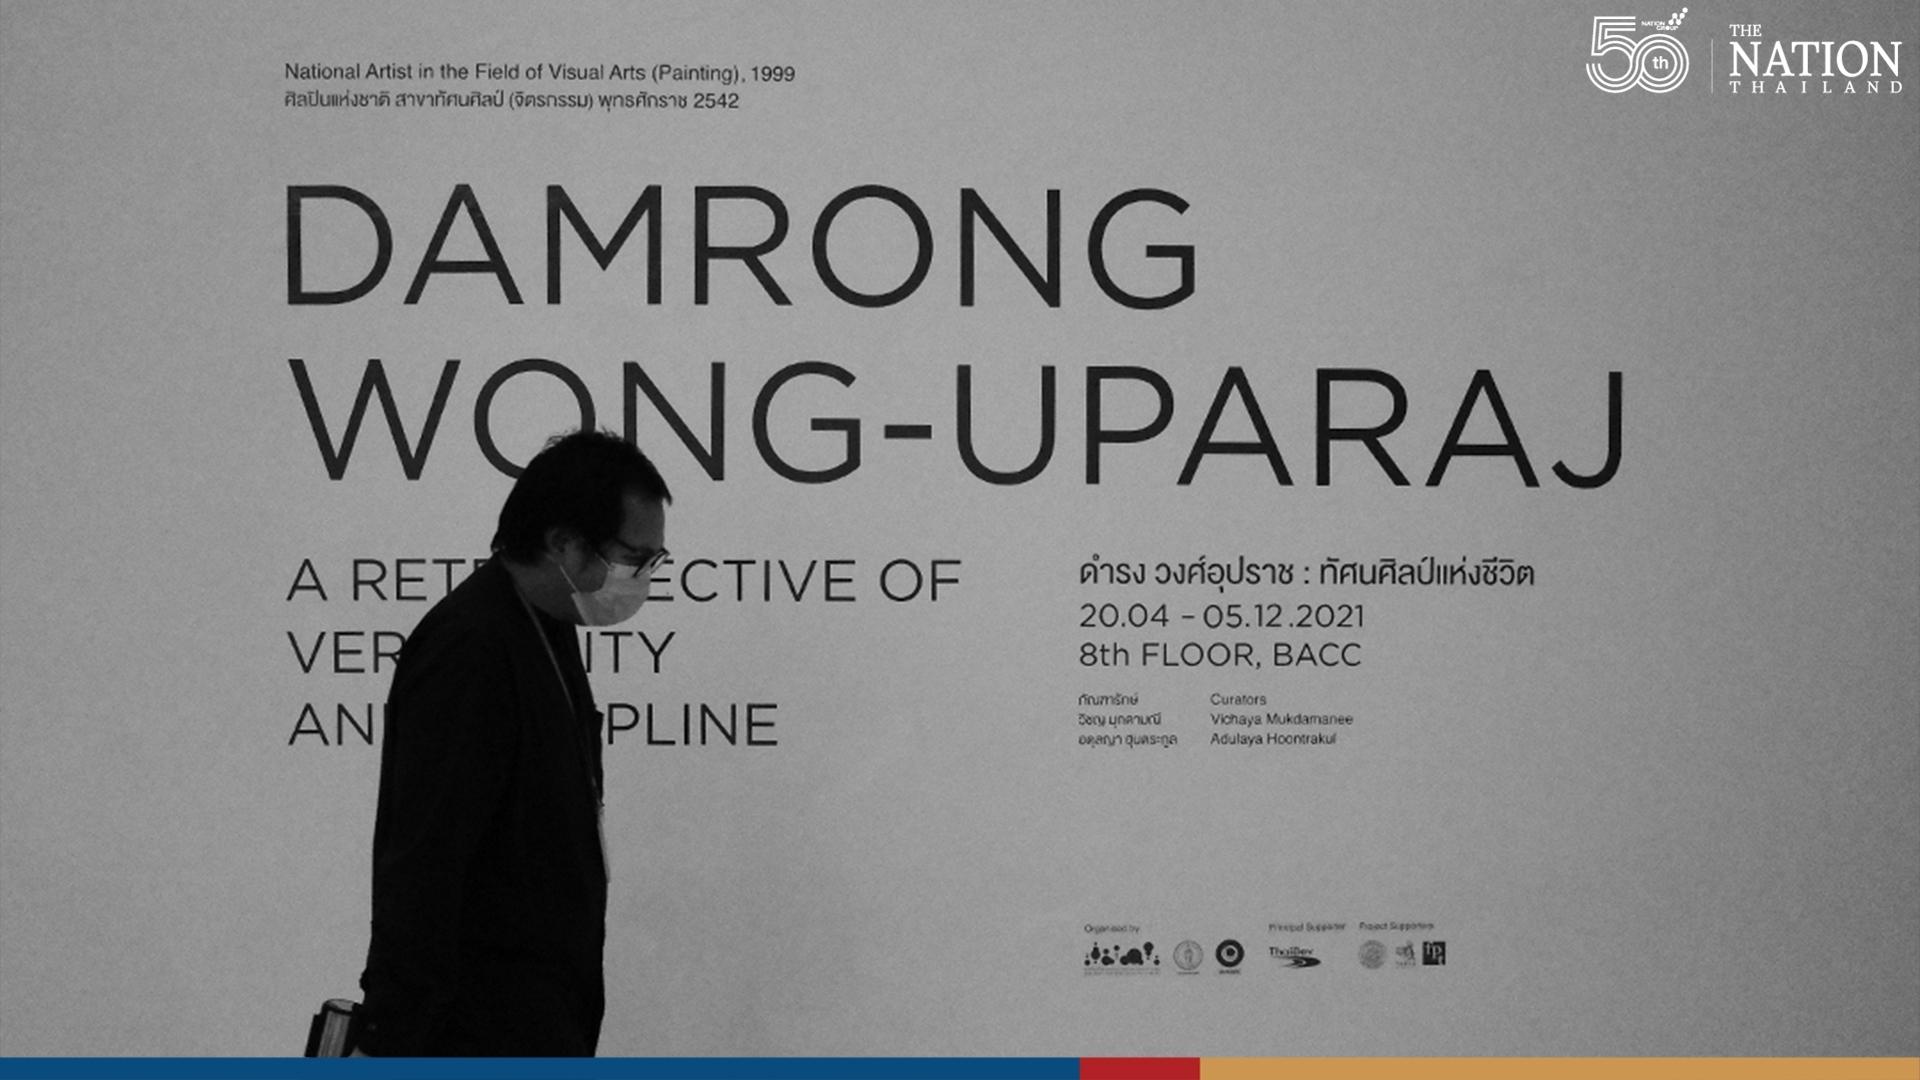 BACC opens with dedication to late National Artist Damgrong Wong-Uparaj